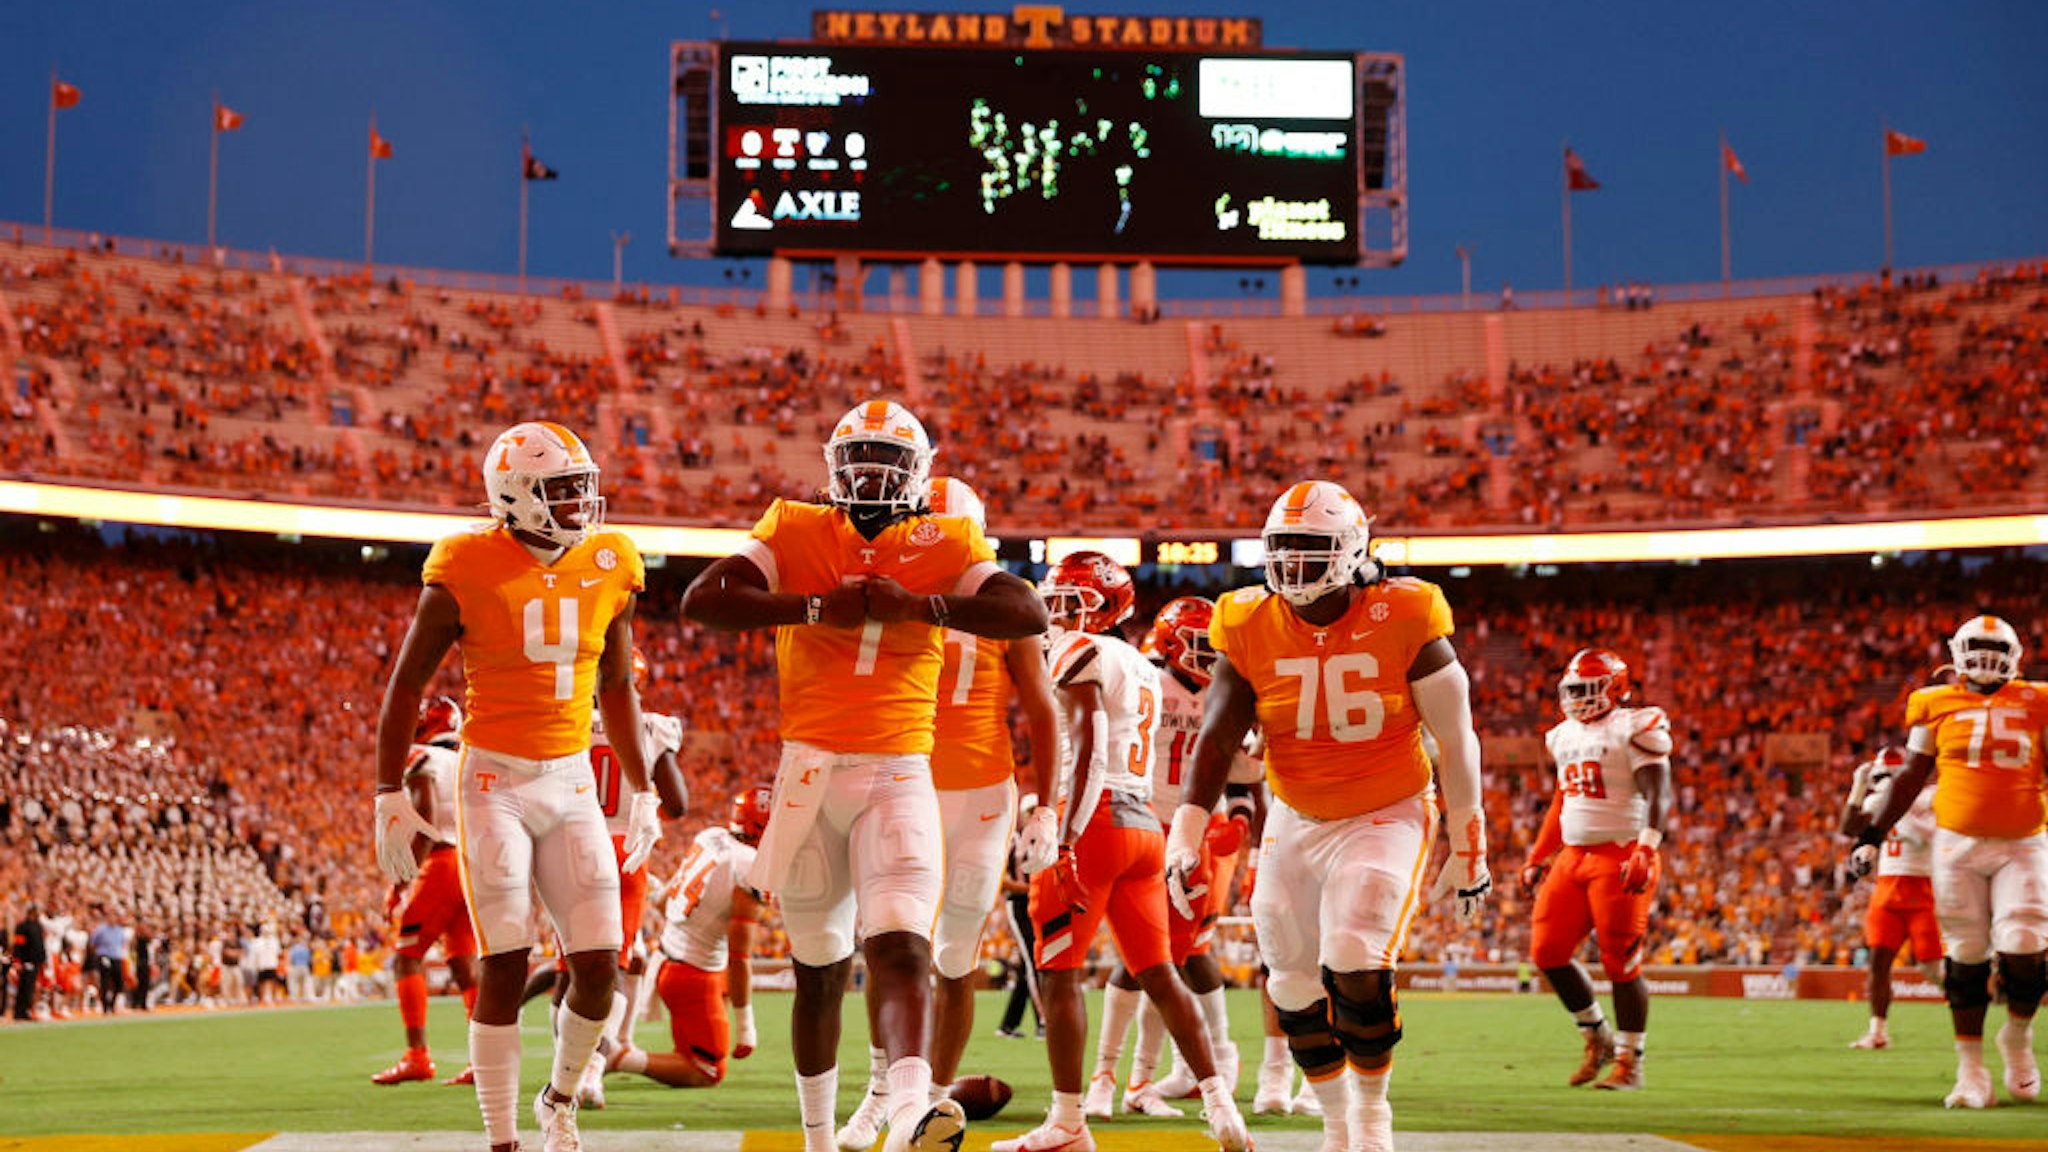 KNOXVILLE, TN - SEPTEMBER 02: Tennessee Volunteers quarterback Joe Milton III (7) celebrates after rushing for a 4-yard touchdown in the first quarter of a college football game against the Bowling Green Falcons on Sept. 2, 2021 at Neyland Stadium in Knoxville, Tennessee. (Photo by Joe Robbins/Icon Sportswire via Getty Images)